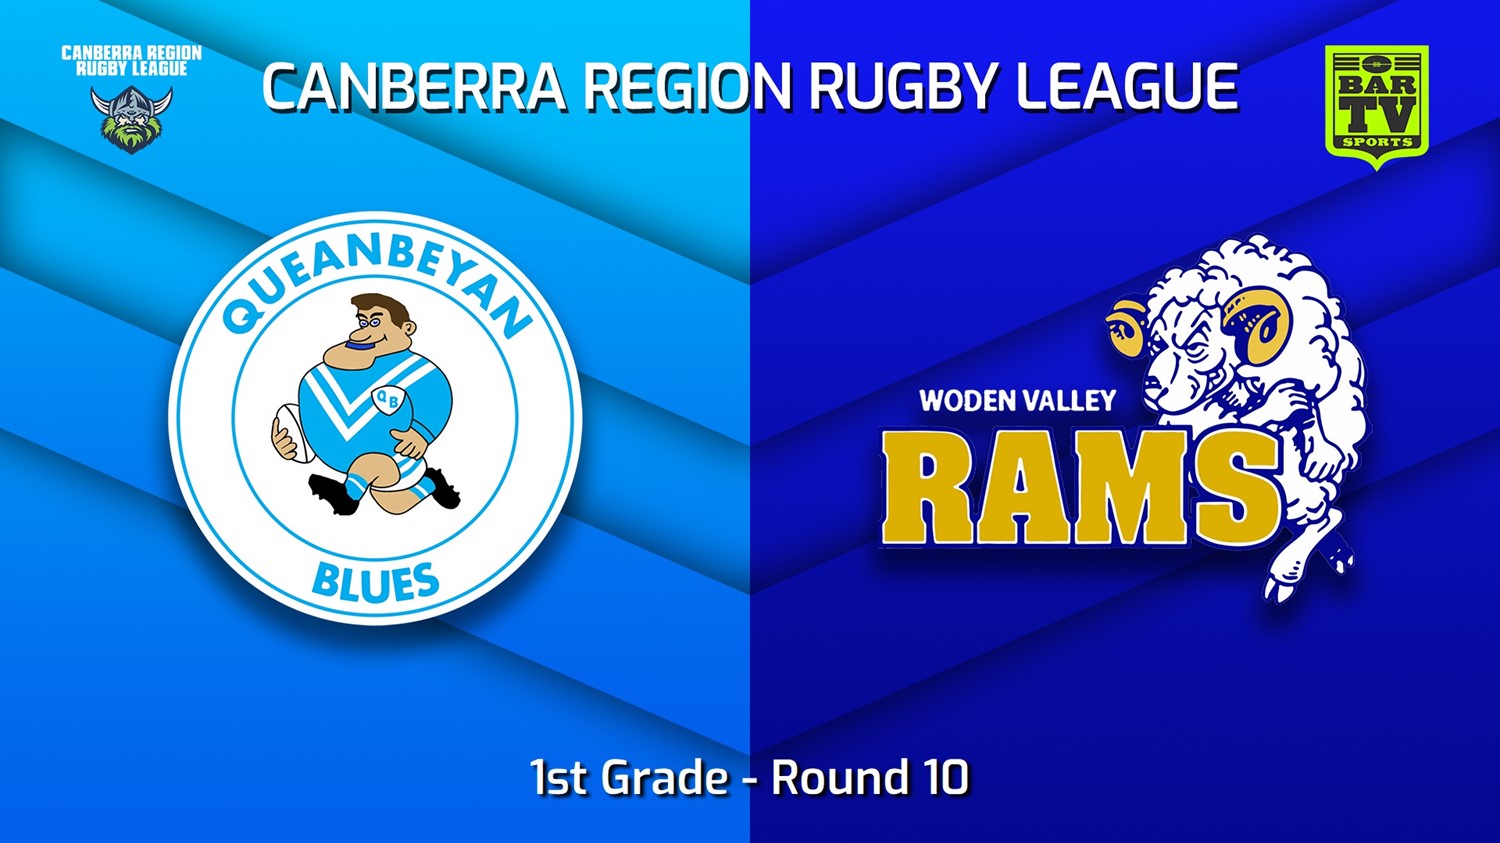 220625-Canberra Round 10 - 1st Grade - Queanbeyan Blues v Woden Valley Rams Slate Image